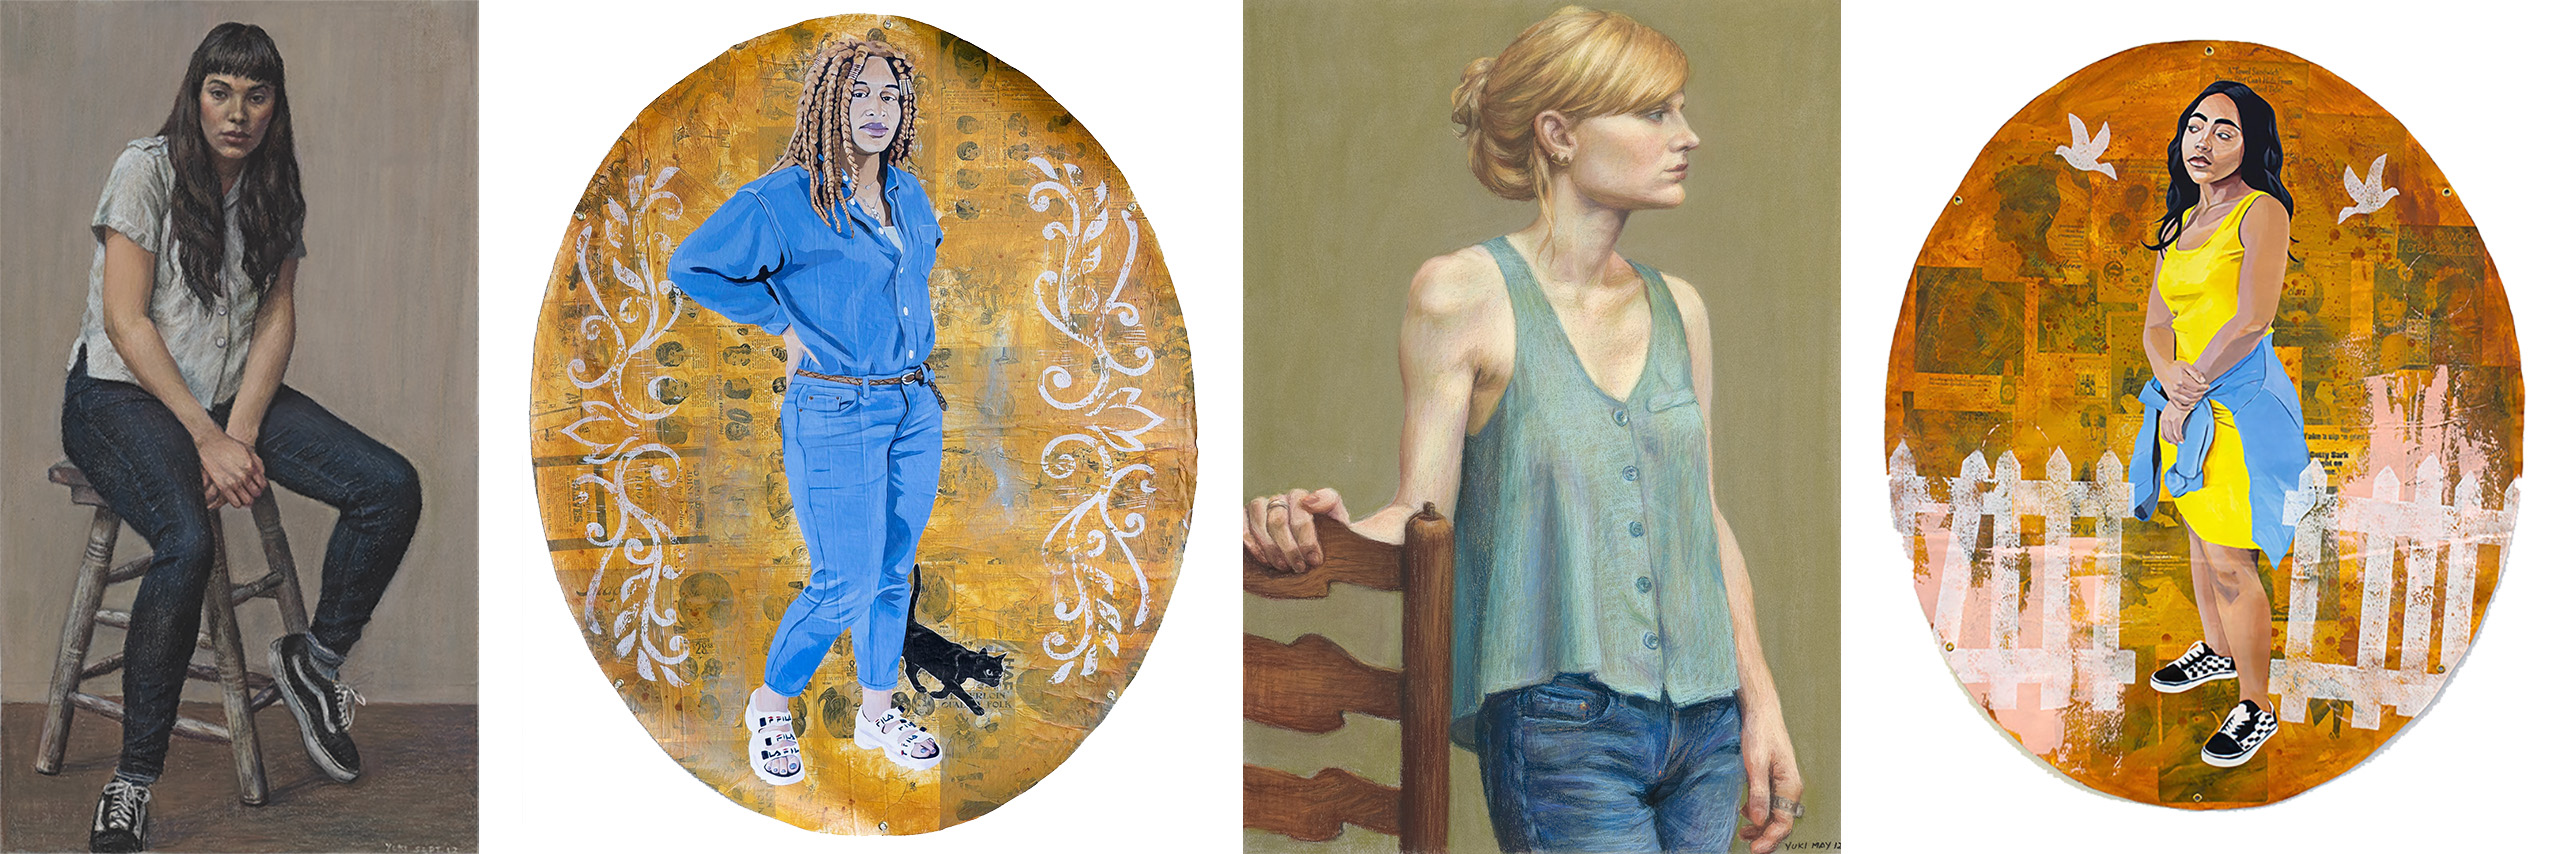 Artwork from the exhibit. Left to Right: A pastel portrait of a woman with long dark hair in a light top and dark jeans sitting on a stool, a painted portrait of a woman in a blue jumpsuit with a gold background, a pastel portrait of a woman in a green tank top and blue jeans holding a chair and a painted portrait of a woman in a yellow dress with a blue jacket around her waist with a gold background.